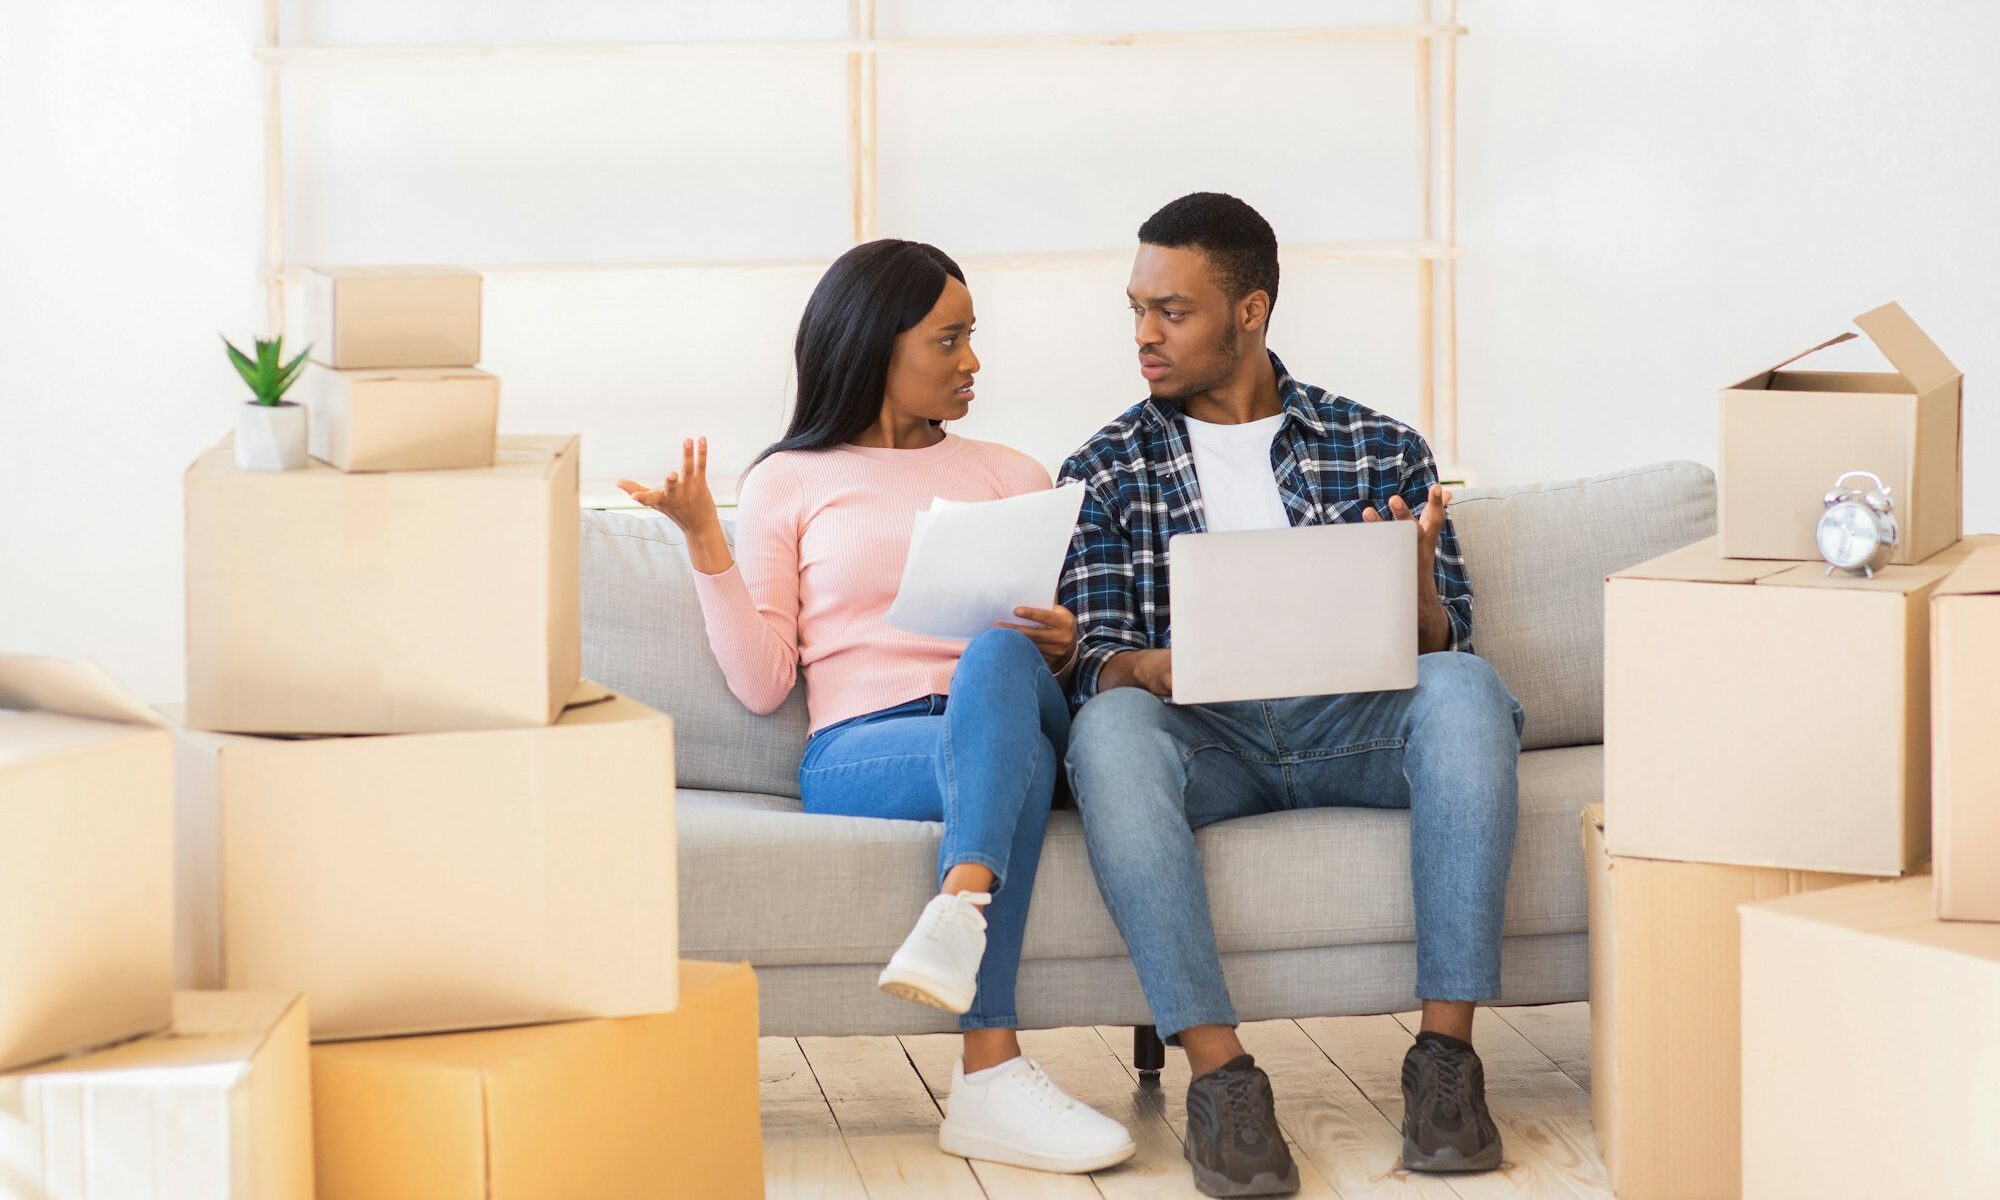 Young family finding moving mistakes when purchasing their house